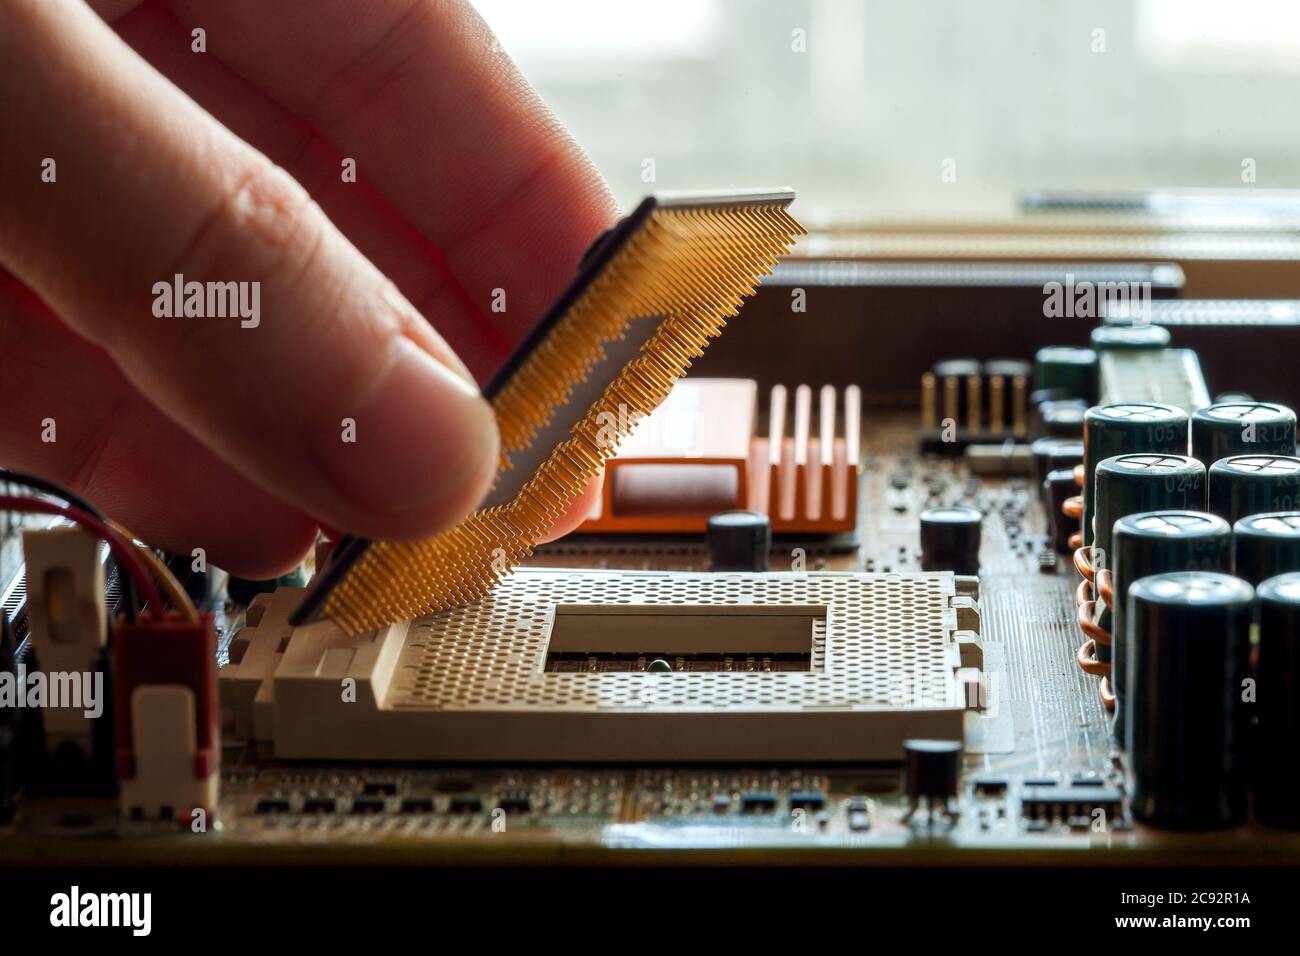 Technician plug in CPU microprocessor to motherboard socket, evident process of installation. Stock Photo